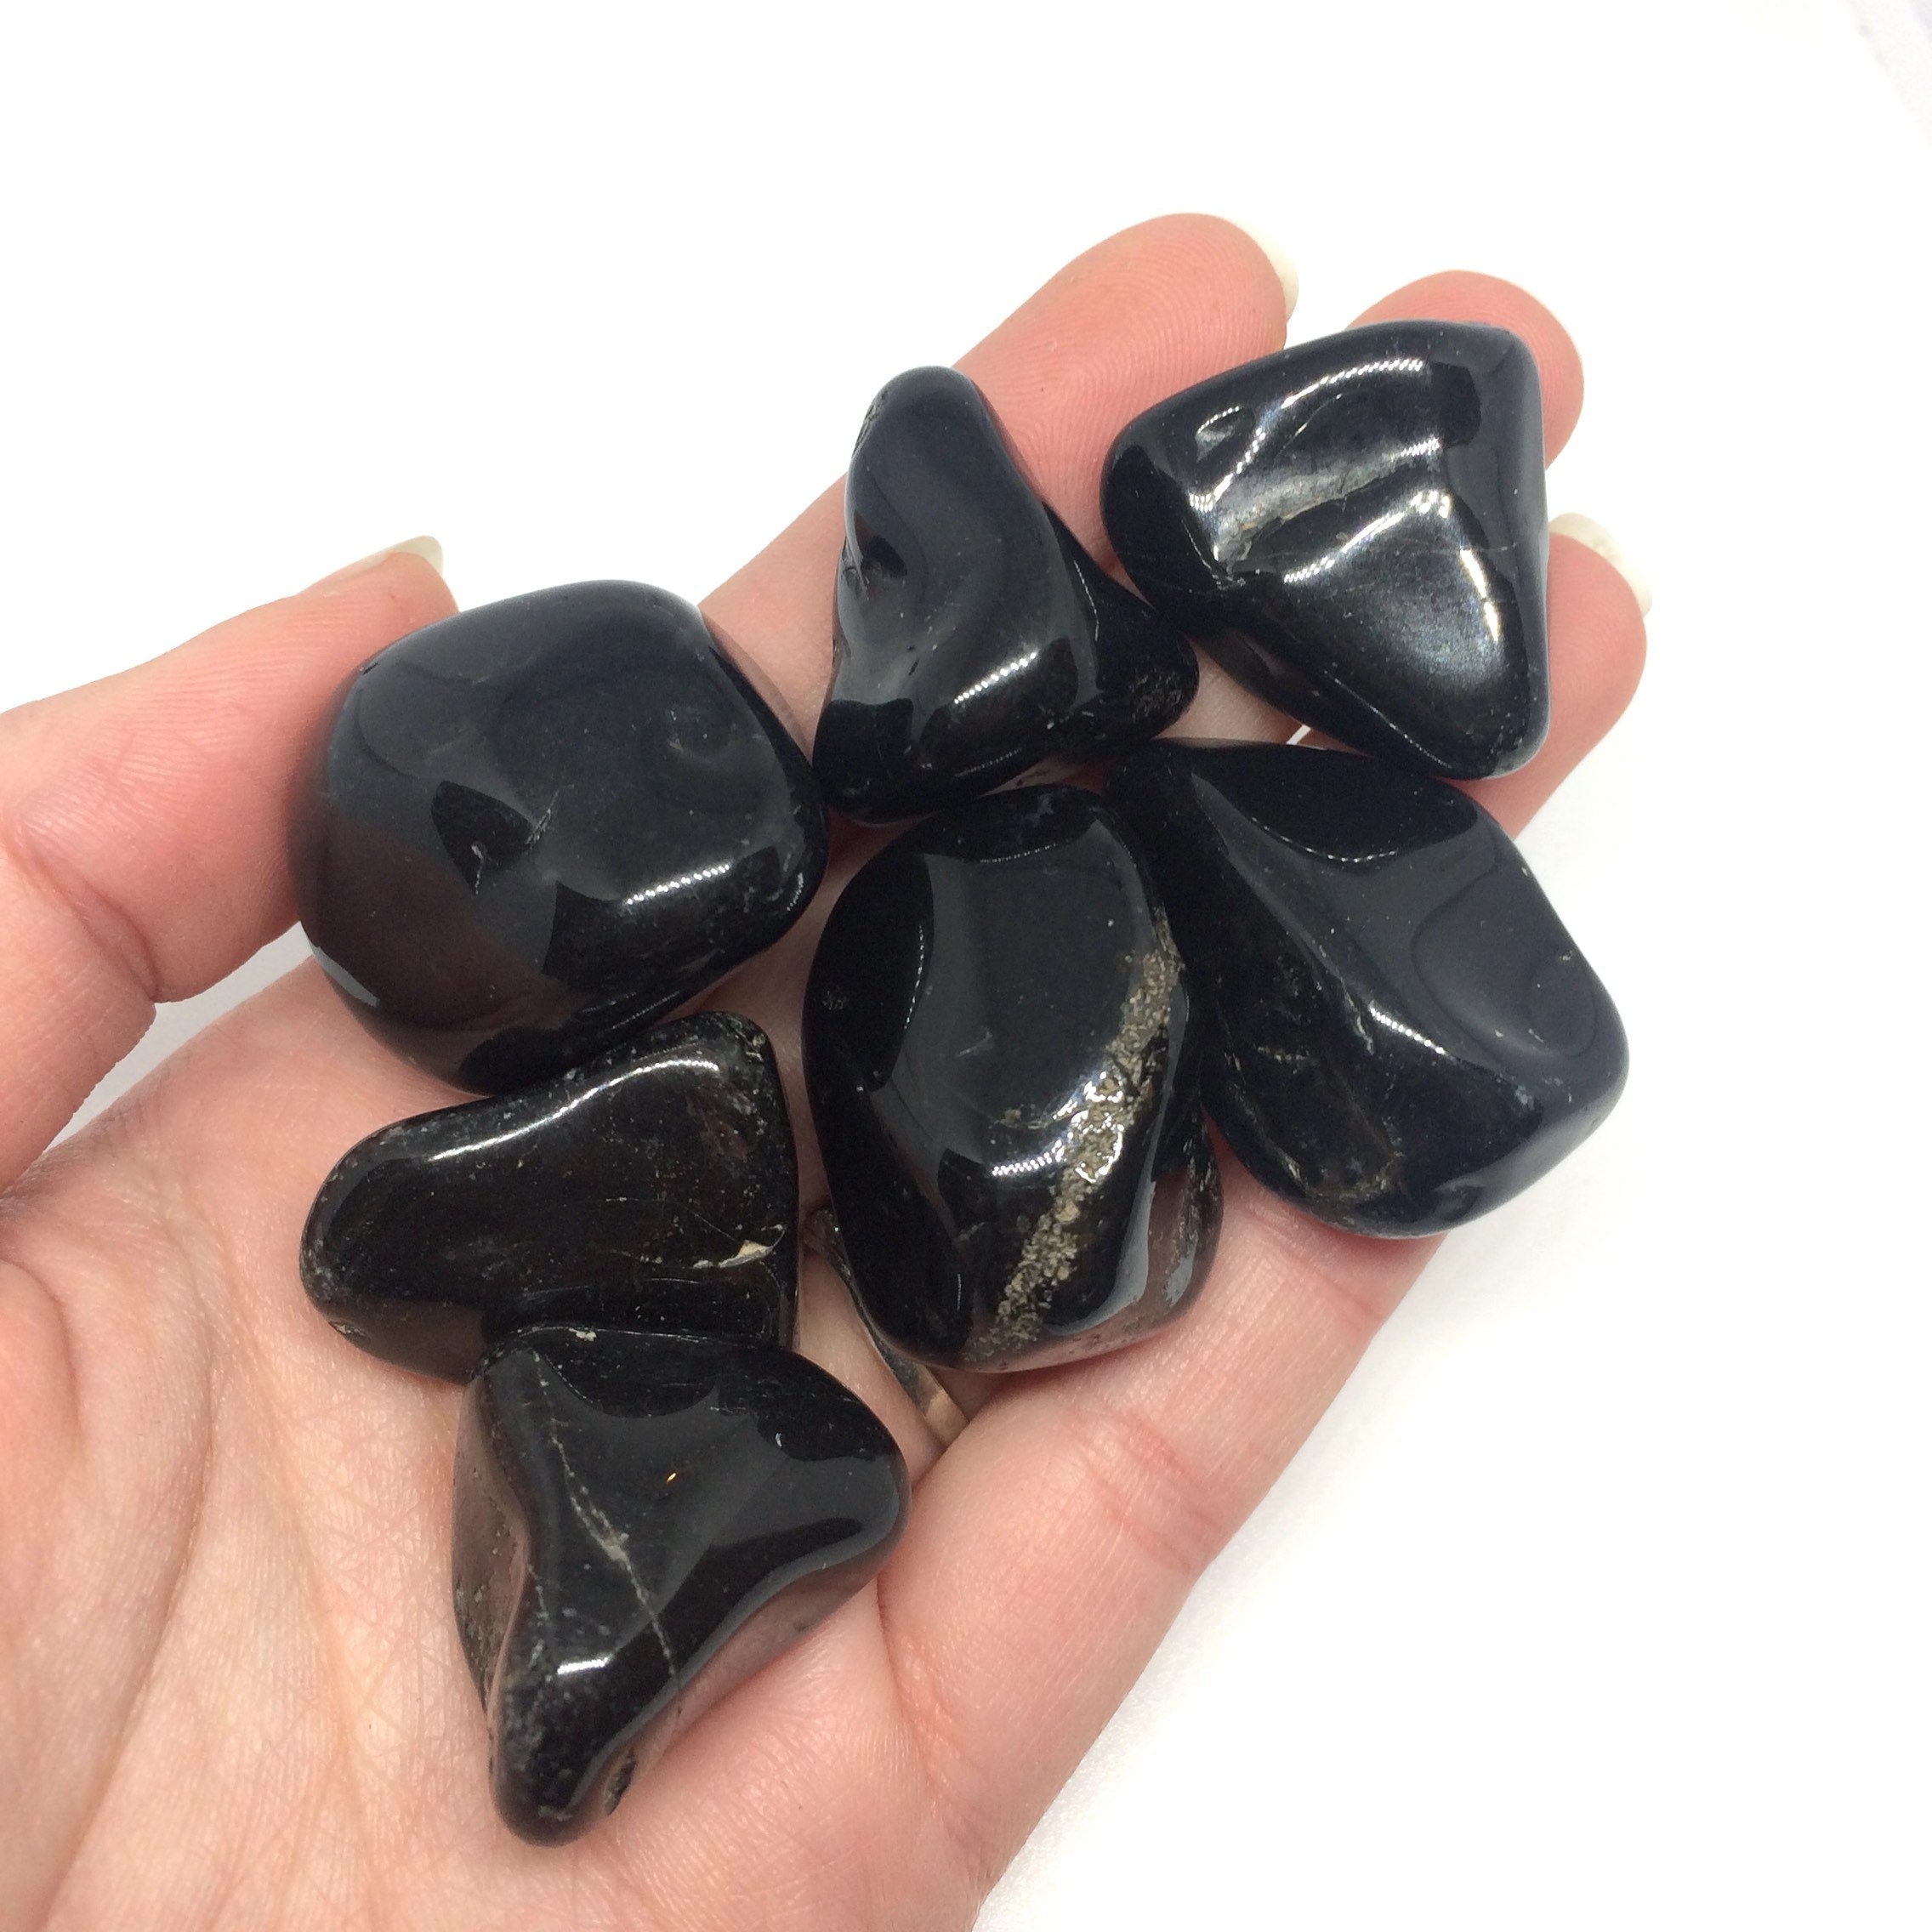 Black Onyx Tumbled Stones, Extra Large, 20 to 24 grams, 1 to 1-1/4 inches